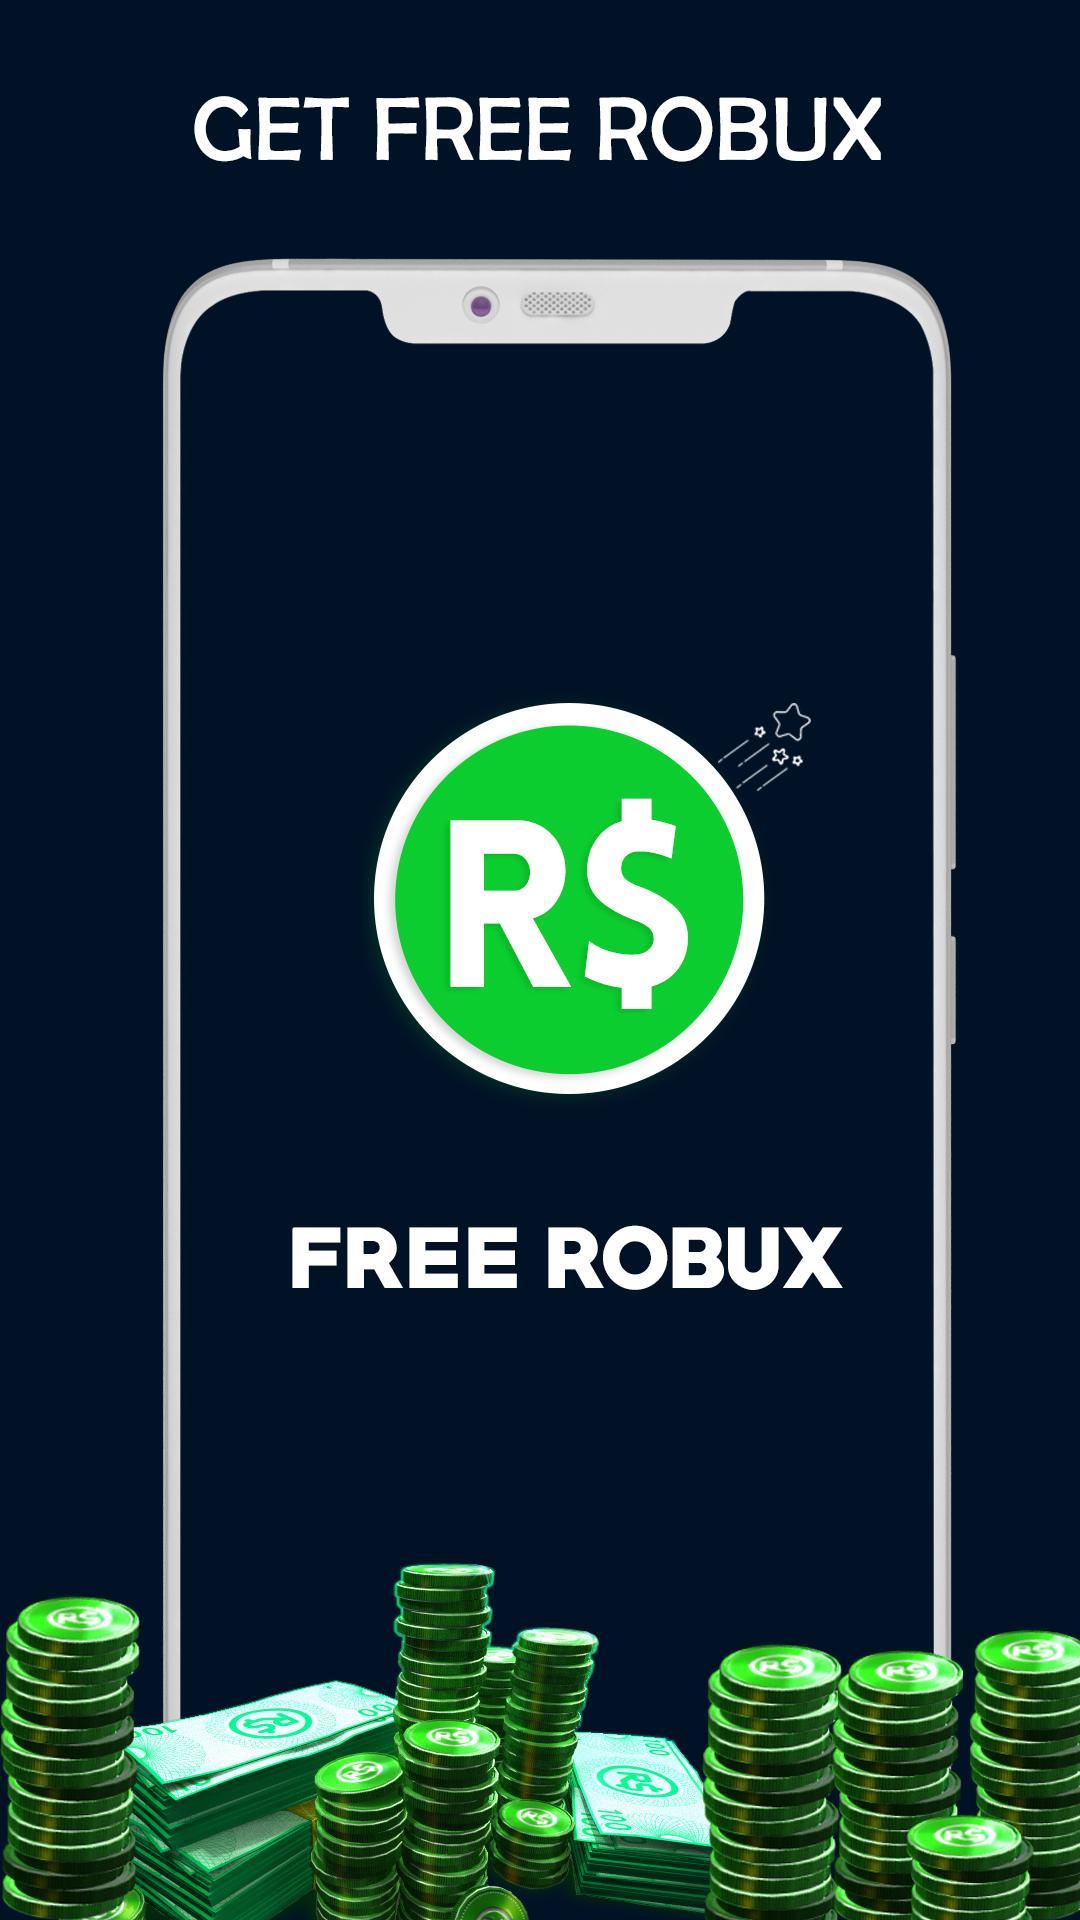 Earn Points To Get Free Robux